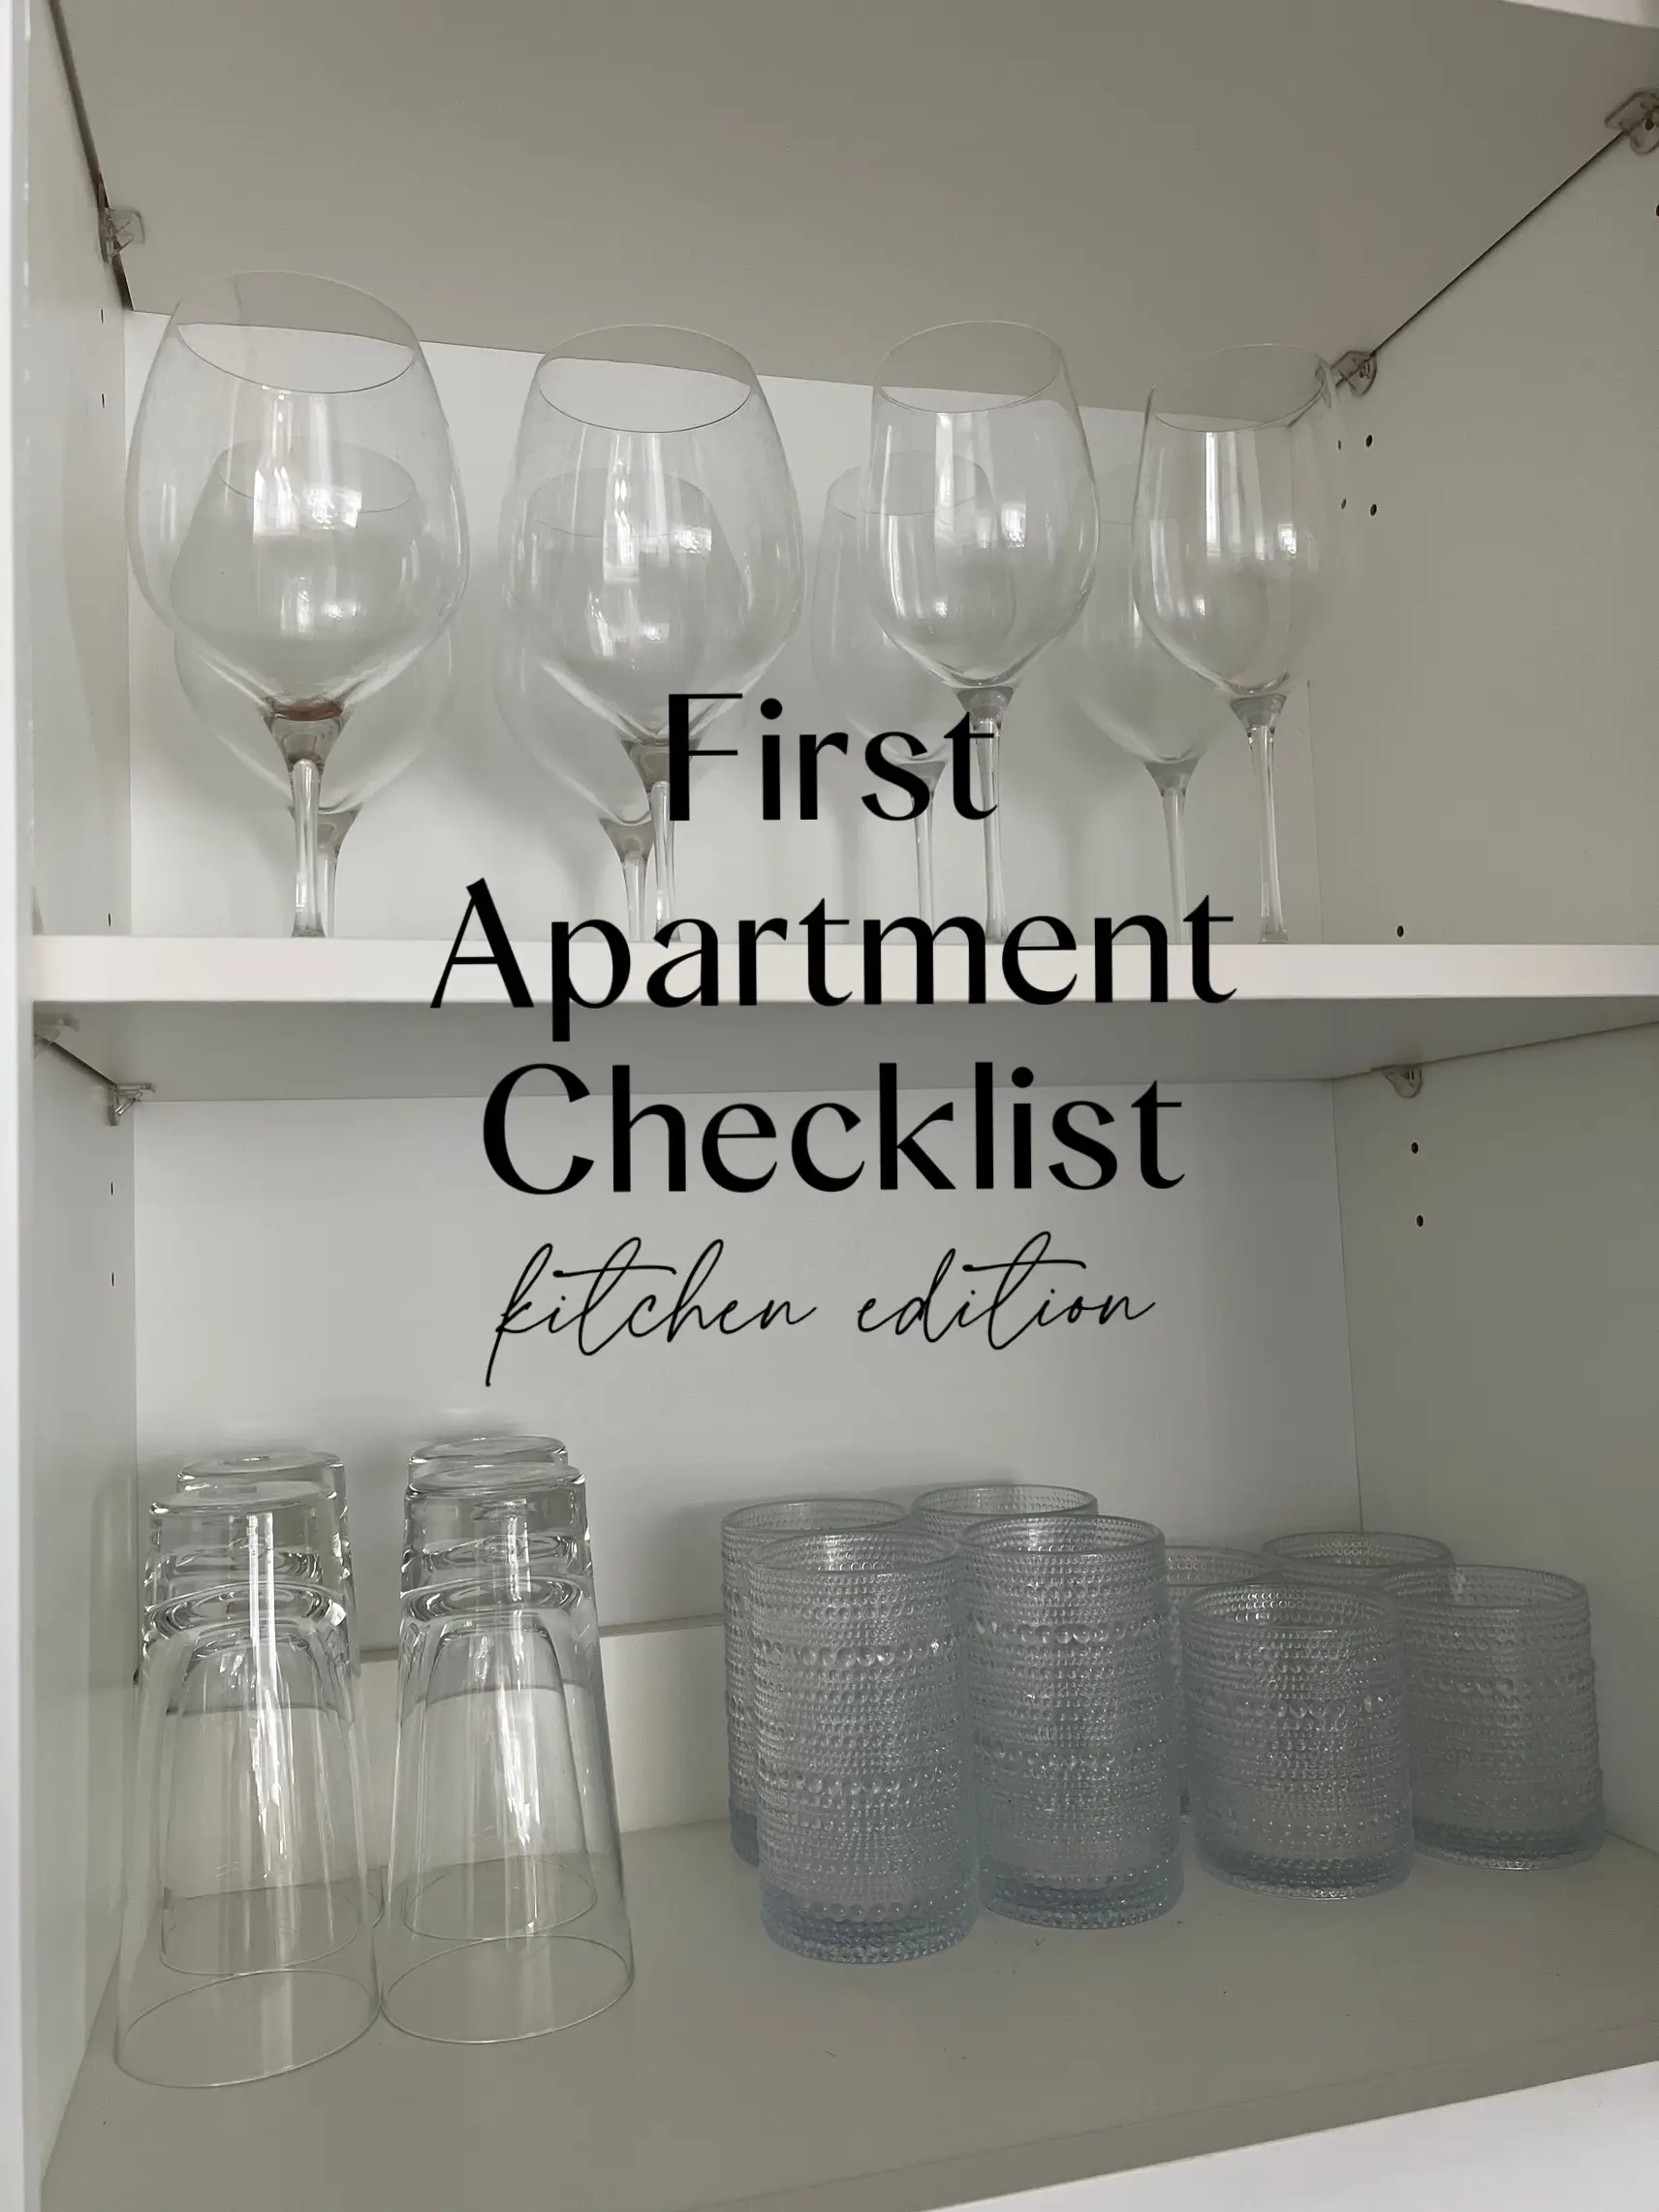 The Domestic Curator: Your First Apartment: Kitchen Essentials